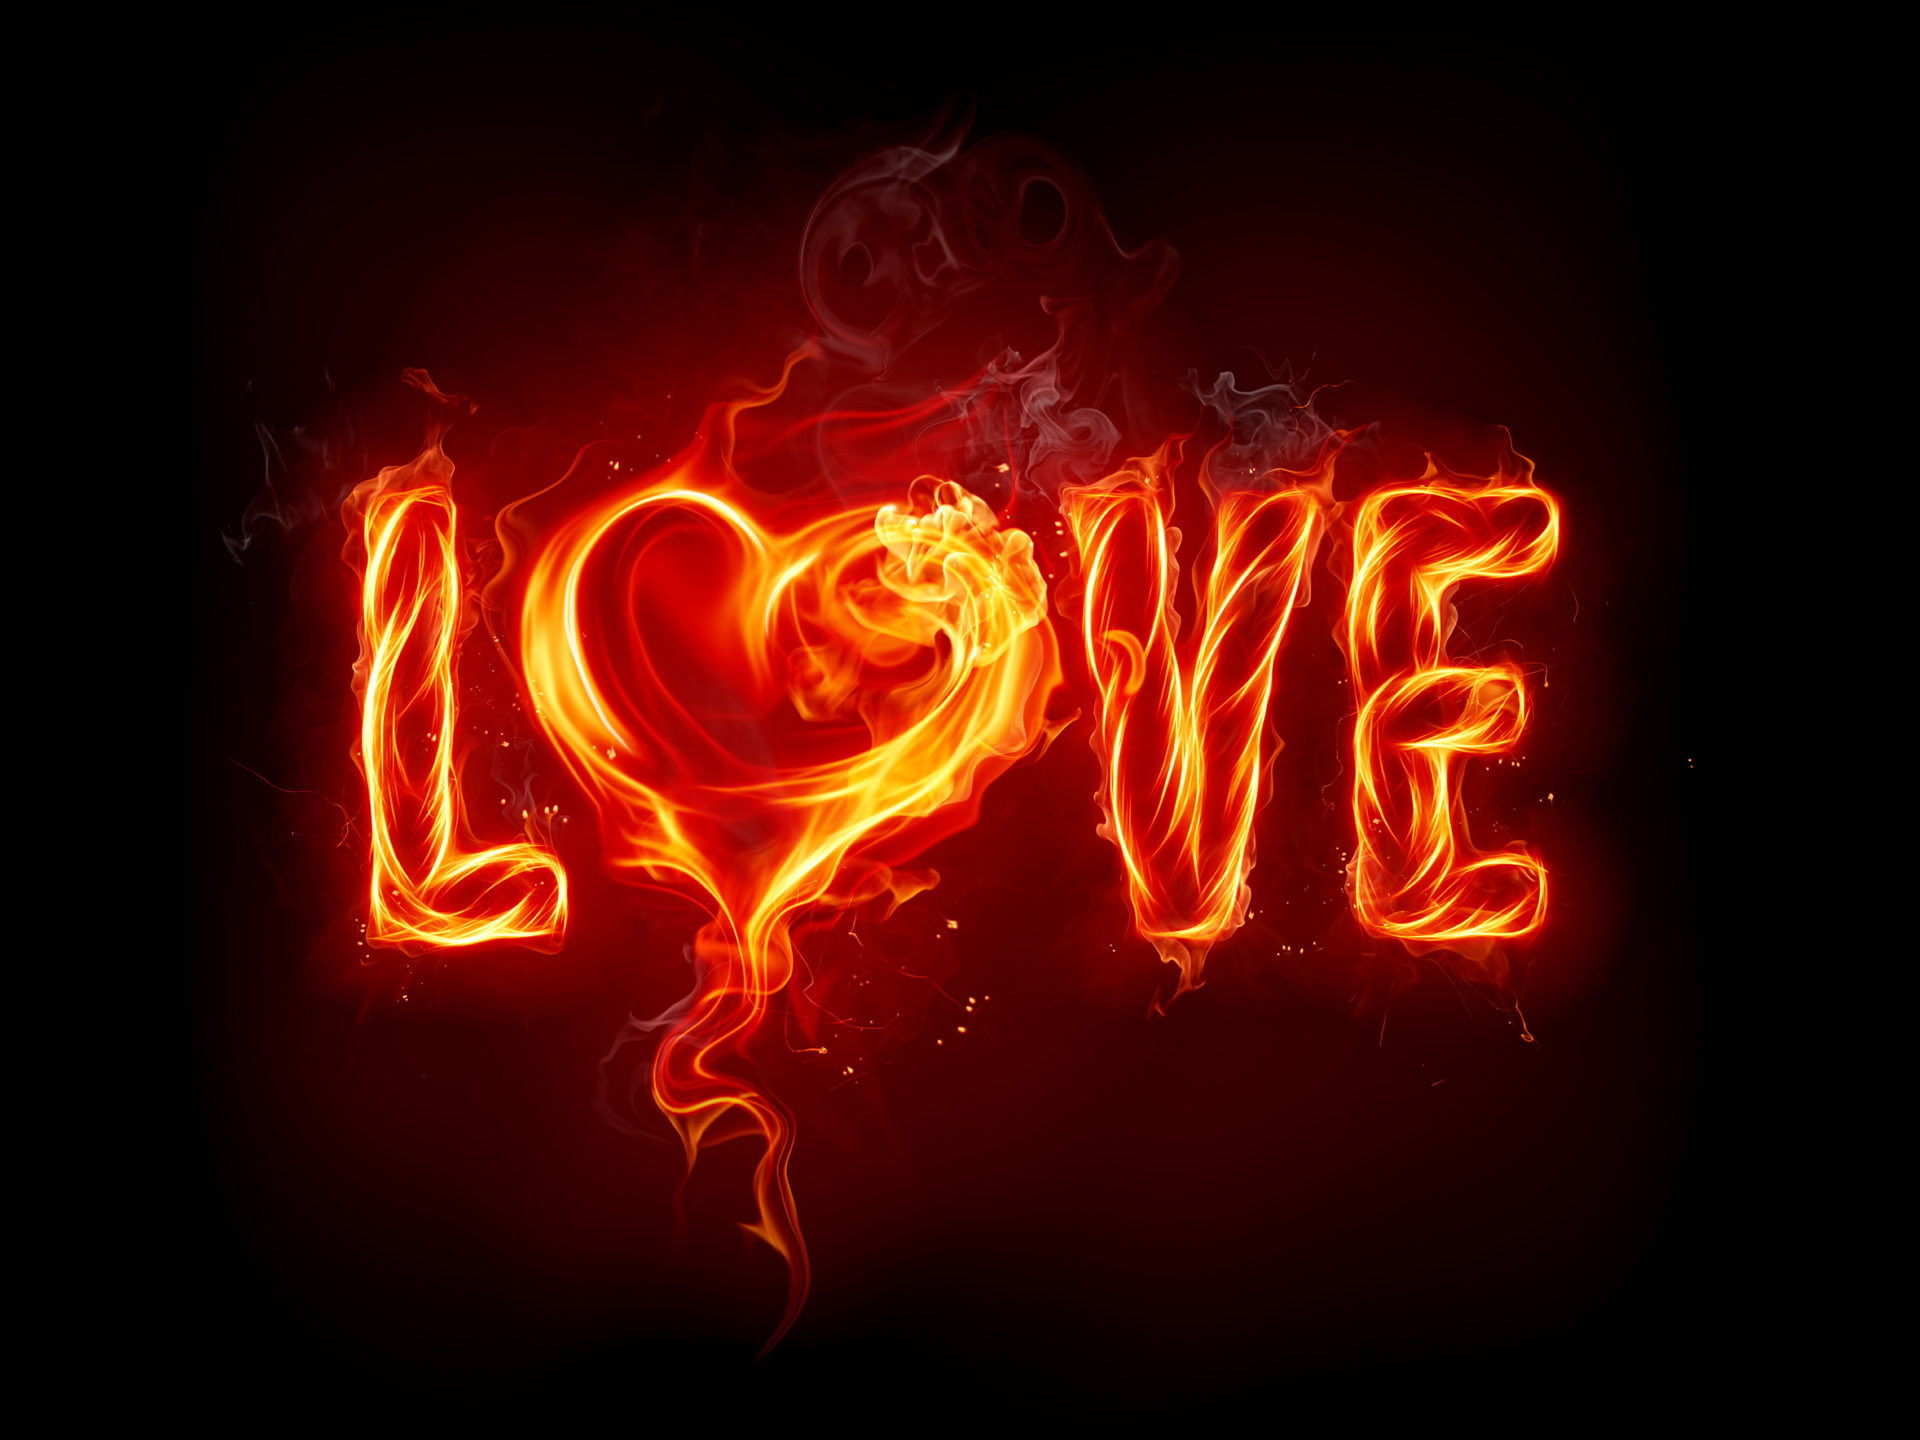 love, fire, artistic High Definition image